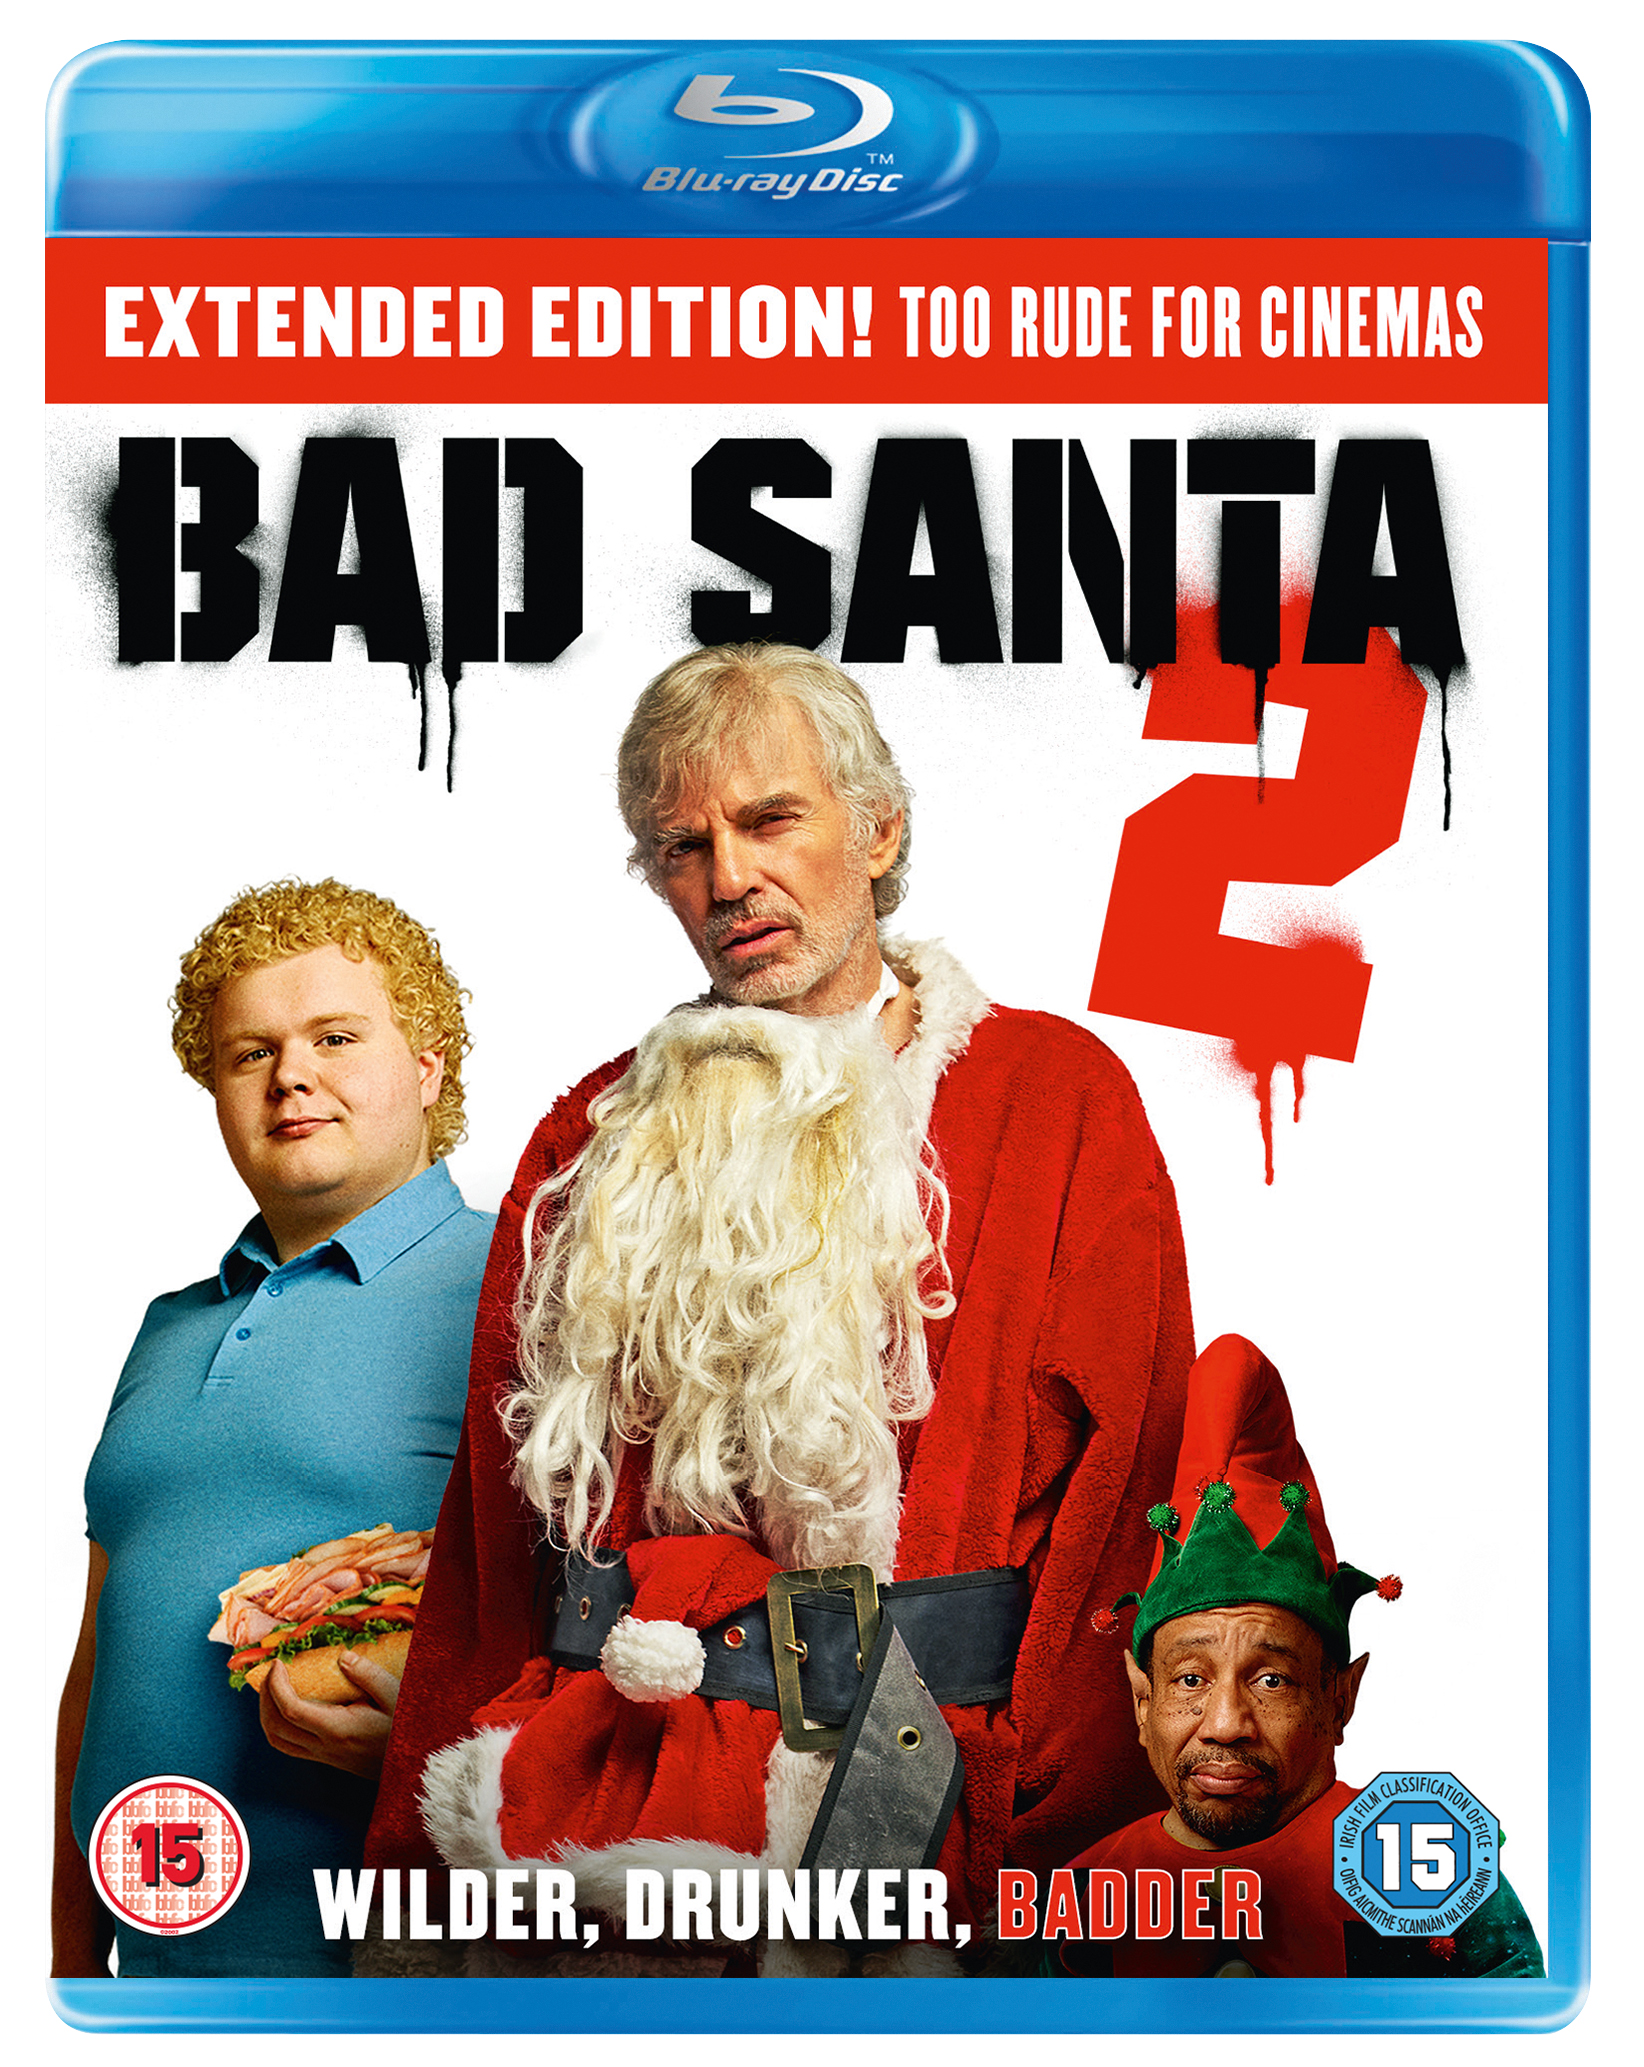 boom competitions - win Bad Santa 2 on Blu-ray